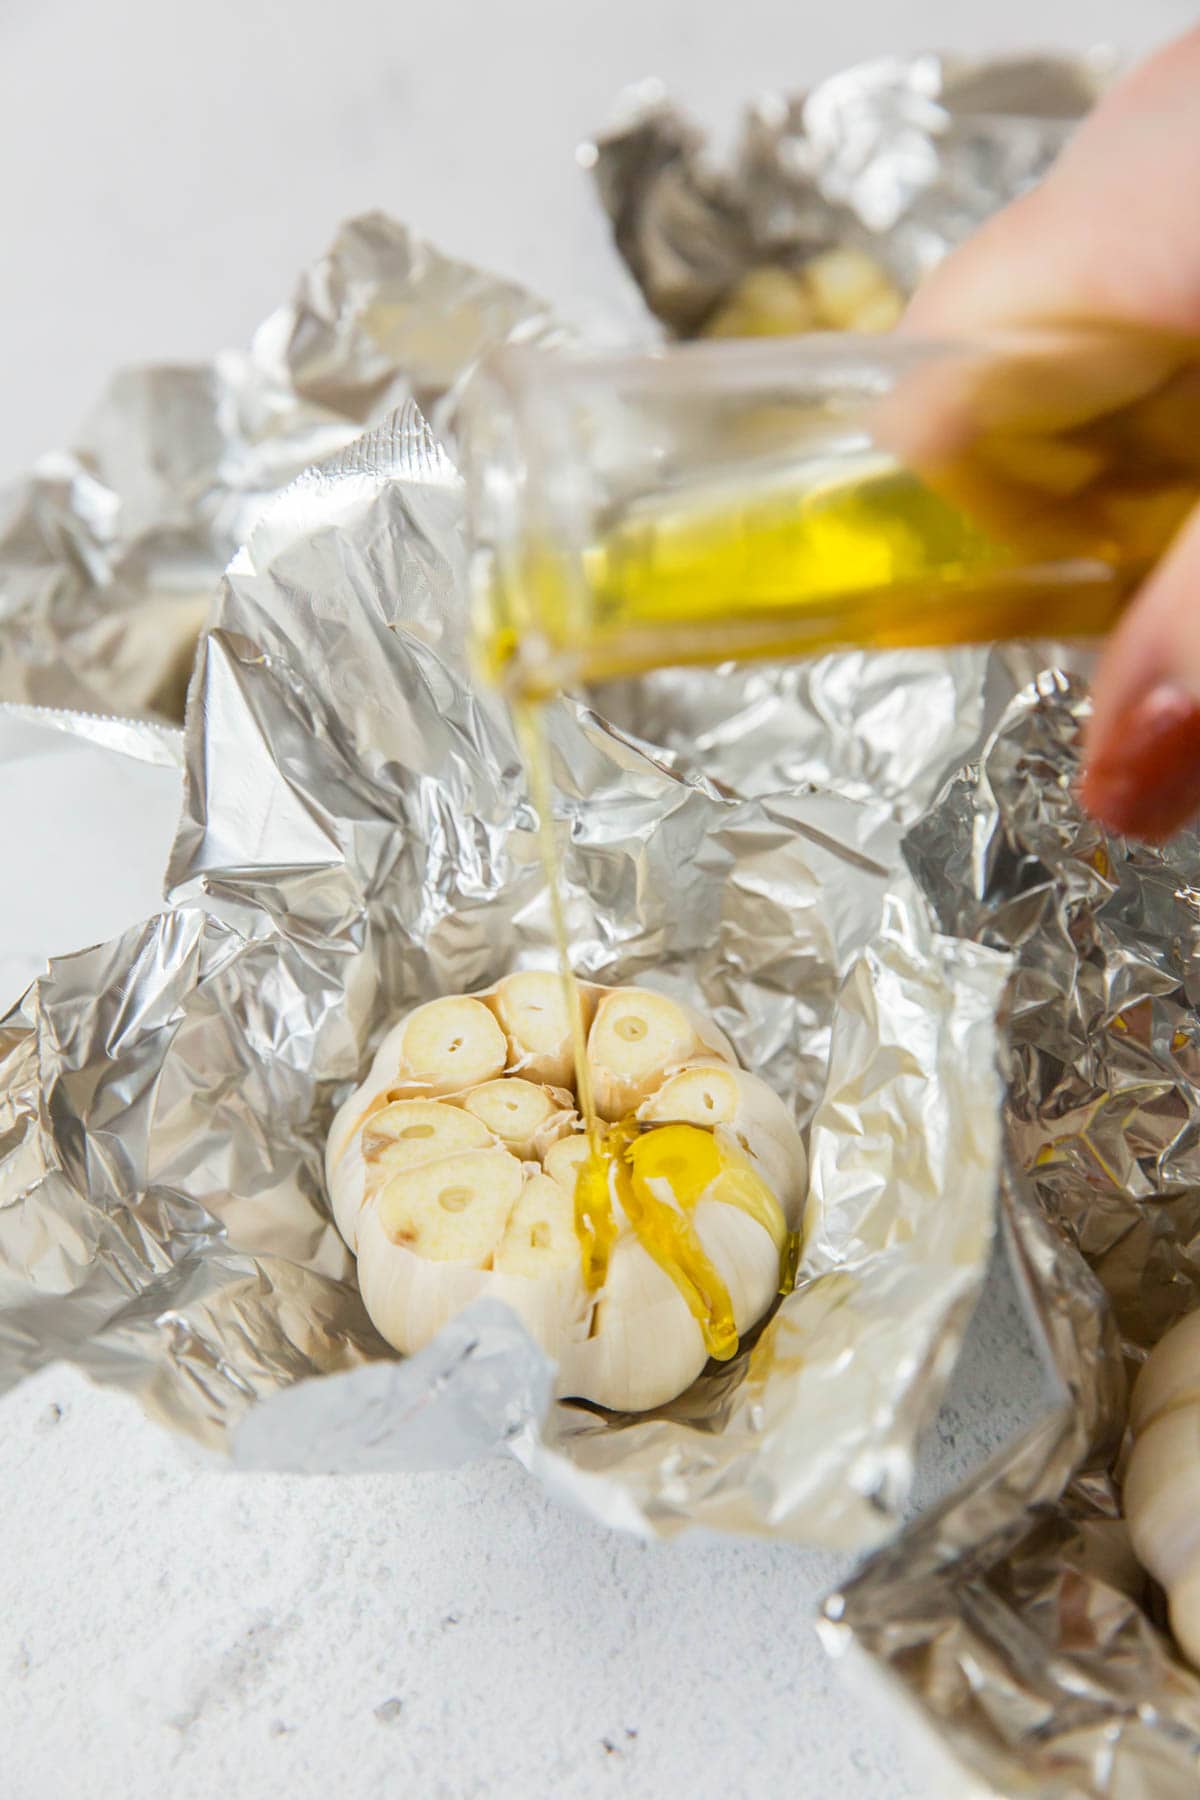 Head of raw garlic drizzled with olive oil and sitting on a piece of foiil.